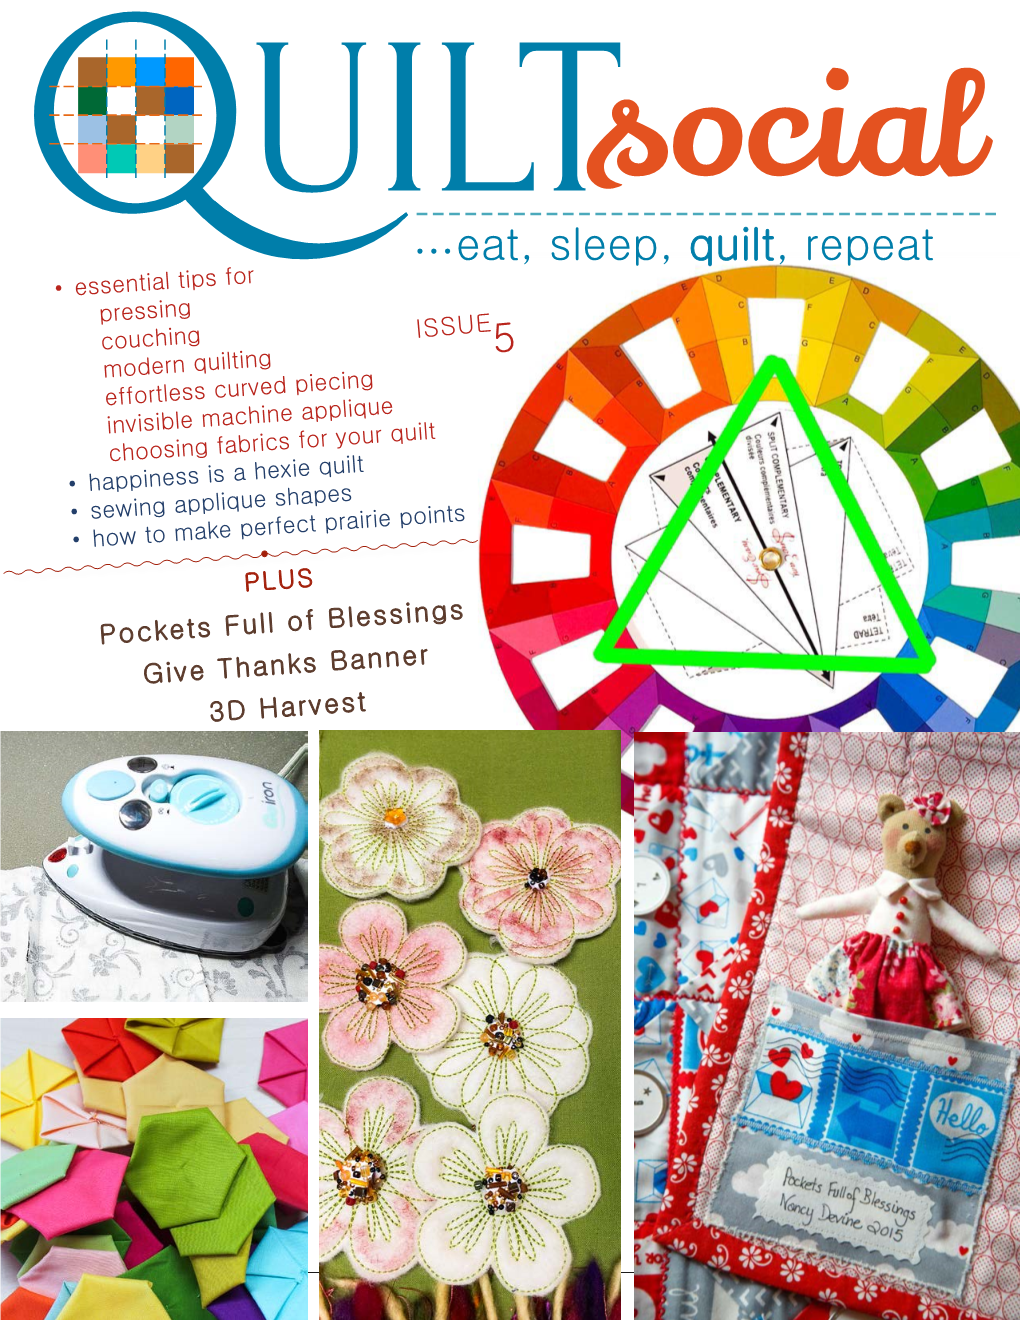 PDF Instructions Quiltsocial Issue 5